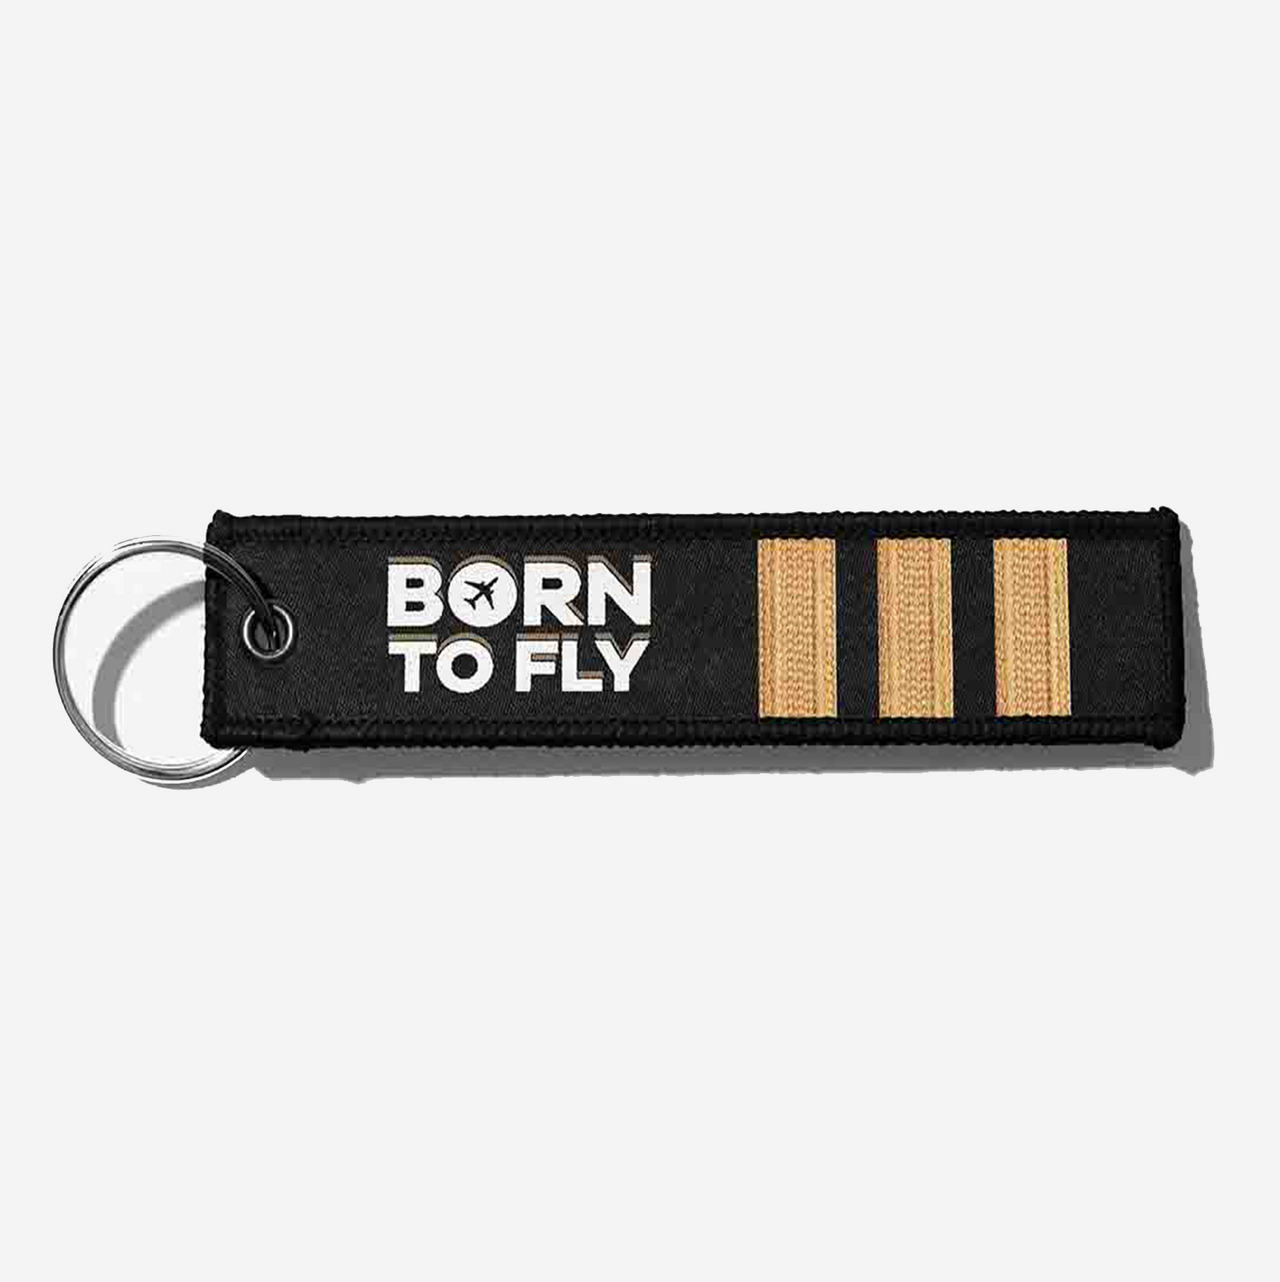 Born to Fly & Pilot Epaulettes (3 Lines) Designed Key Chains